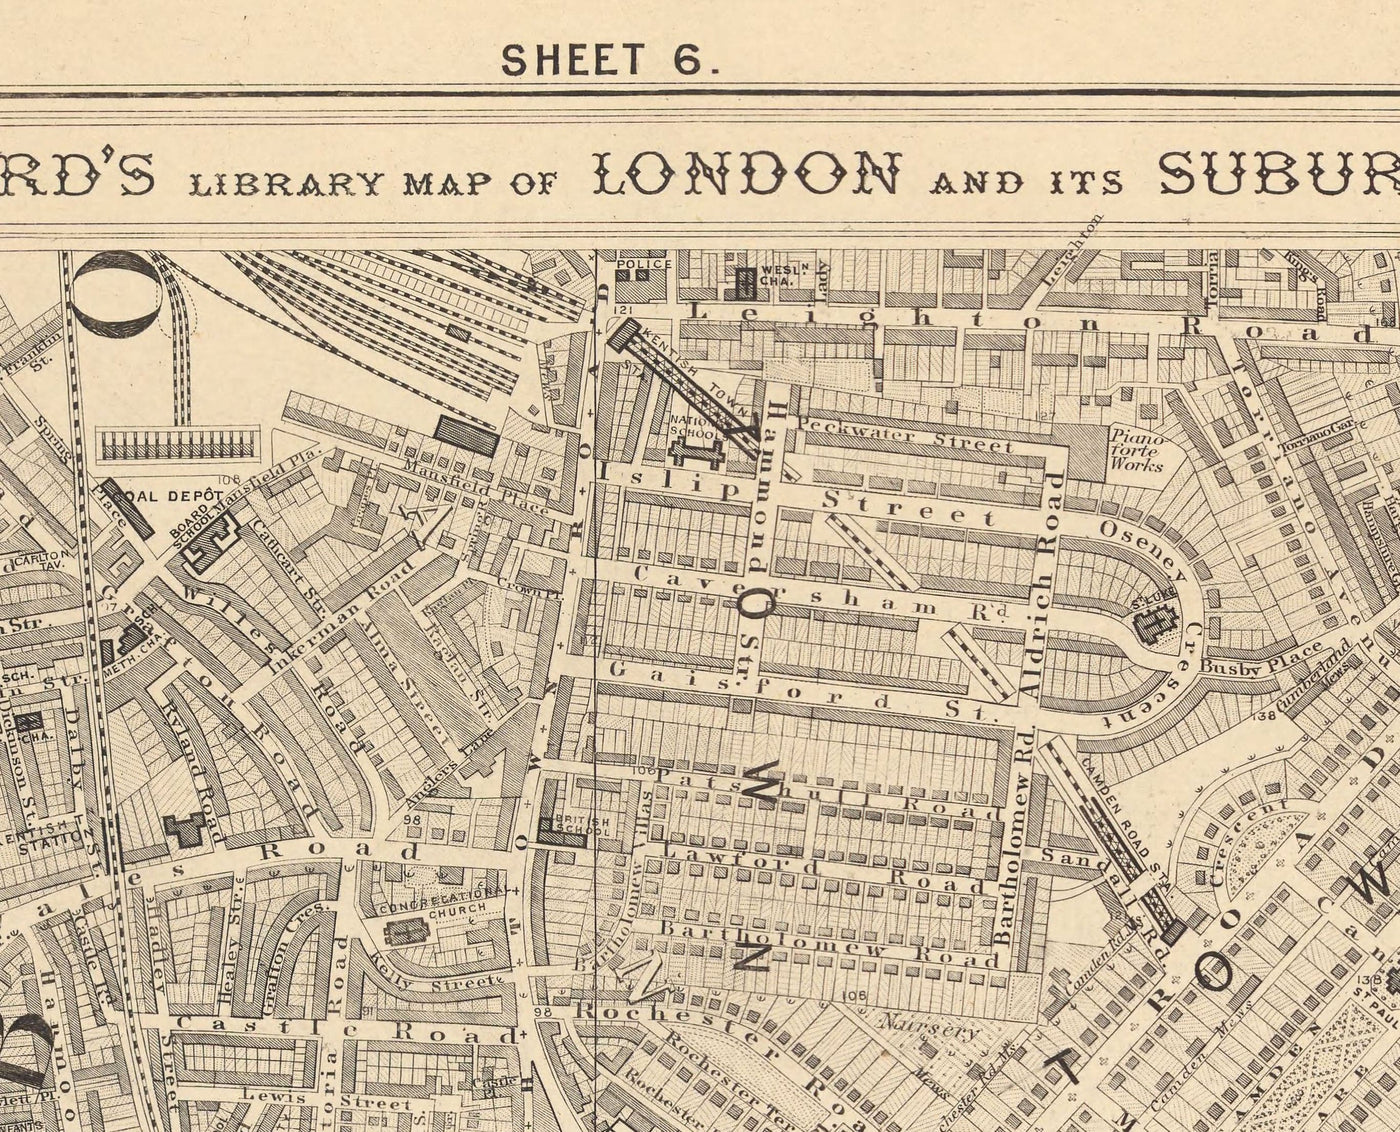 Old Map of North London in 1862 by Edward Stanford - Camden, Regents Park, Kentish Town, Kings Cross - NW1, N1C, N7, NW5, NW3, NW8